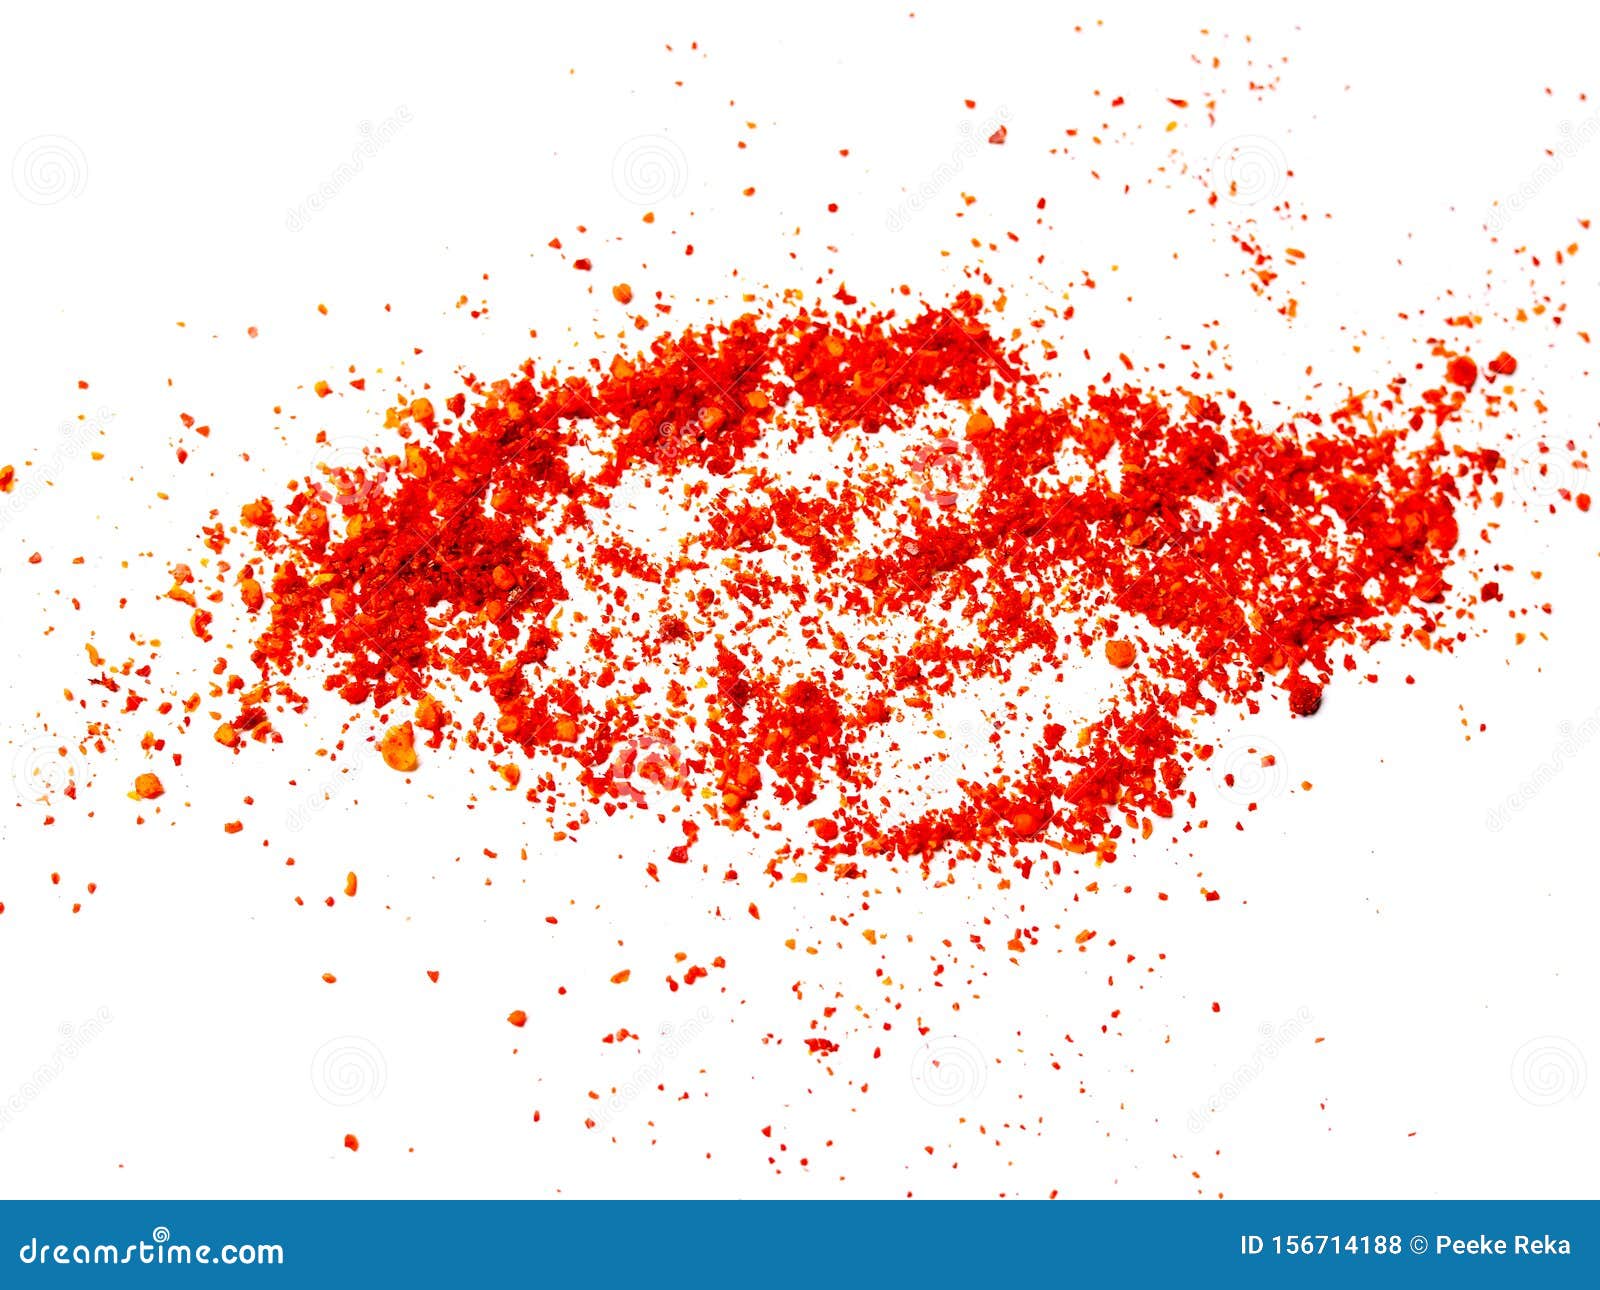 background with red cayenne pepper dry powder  on white background.